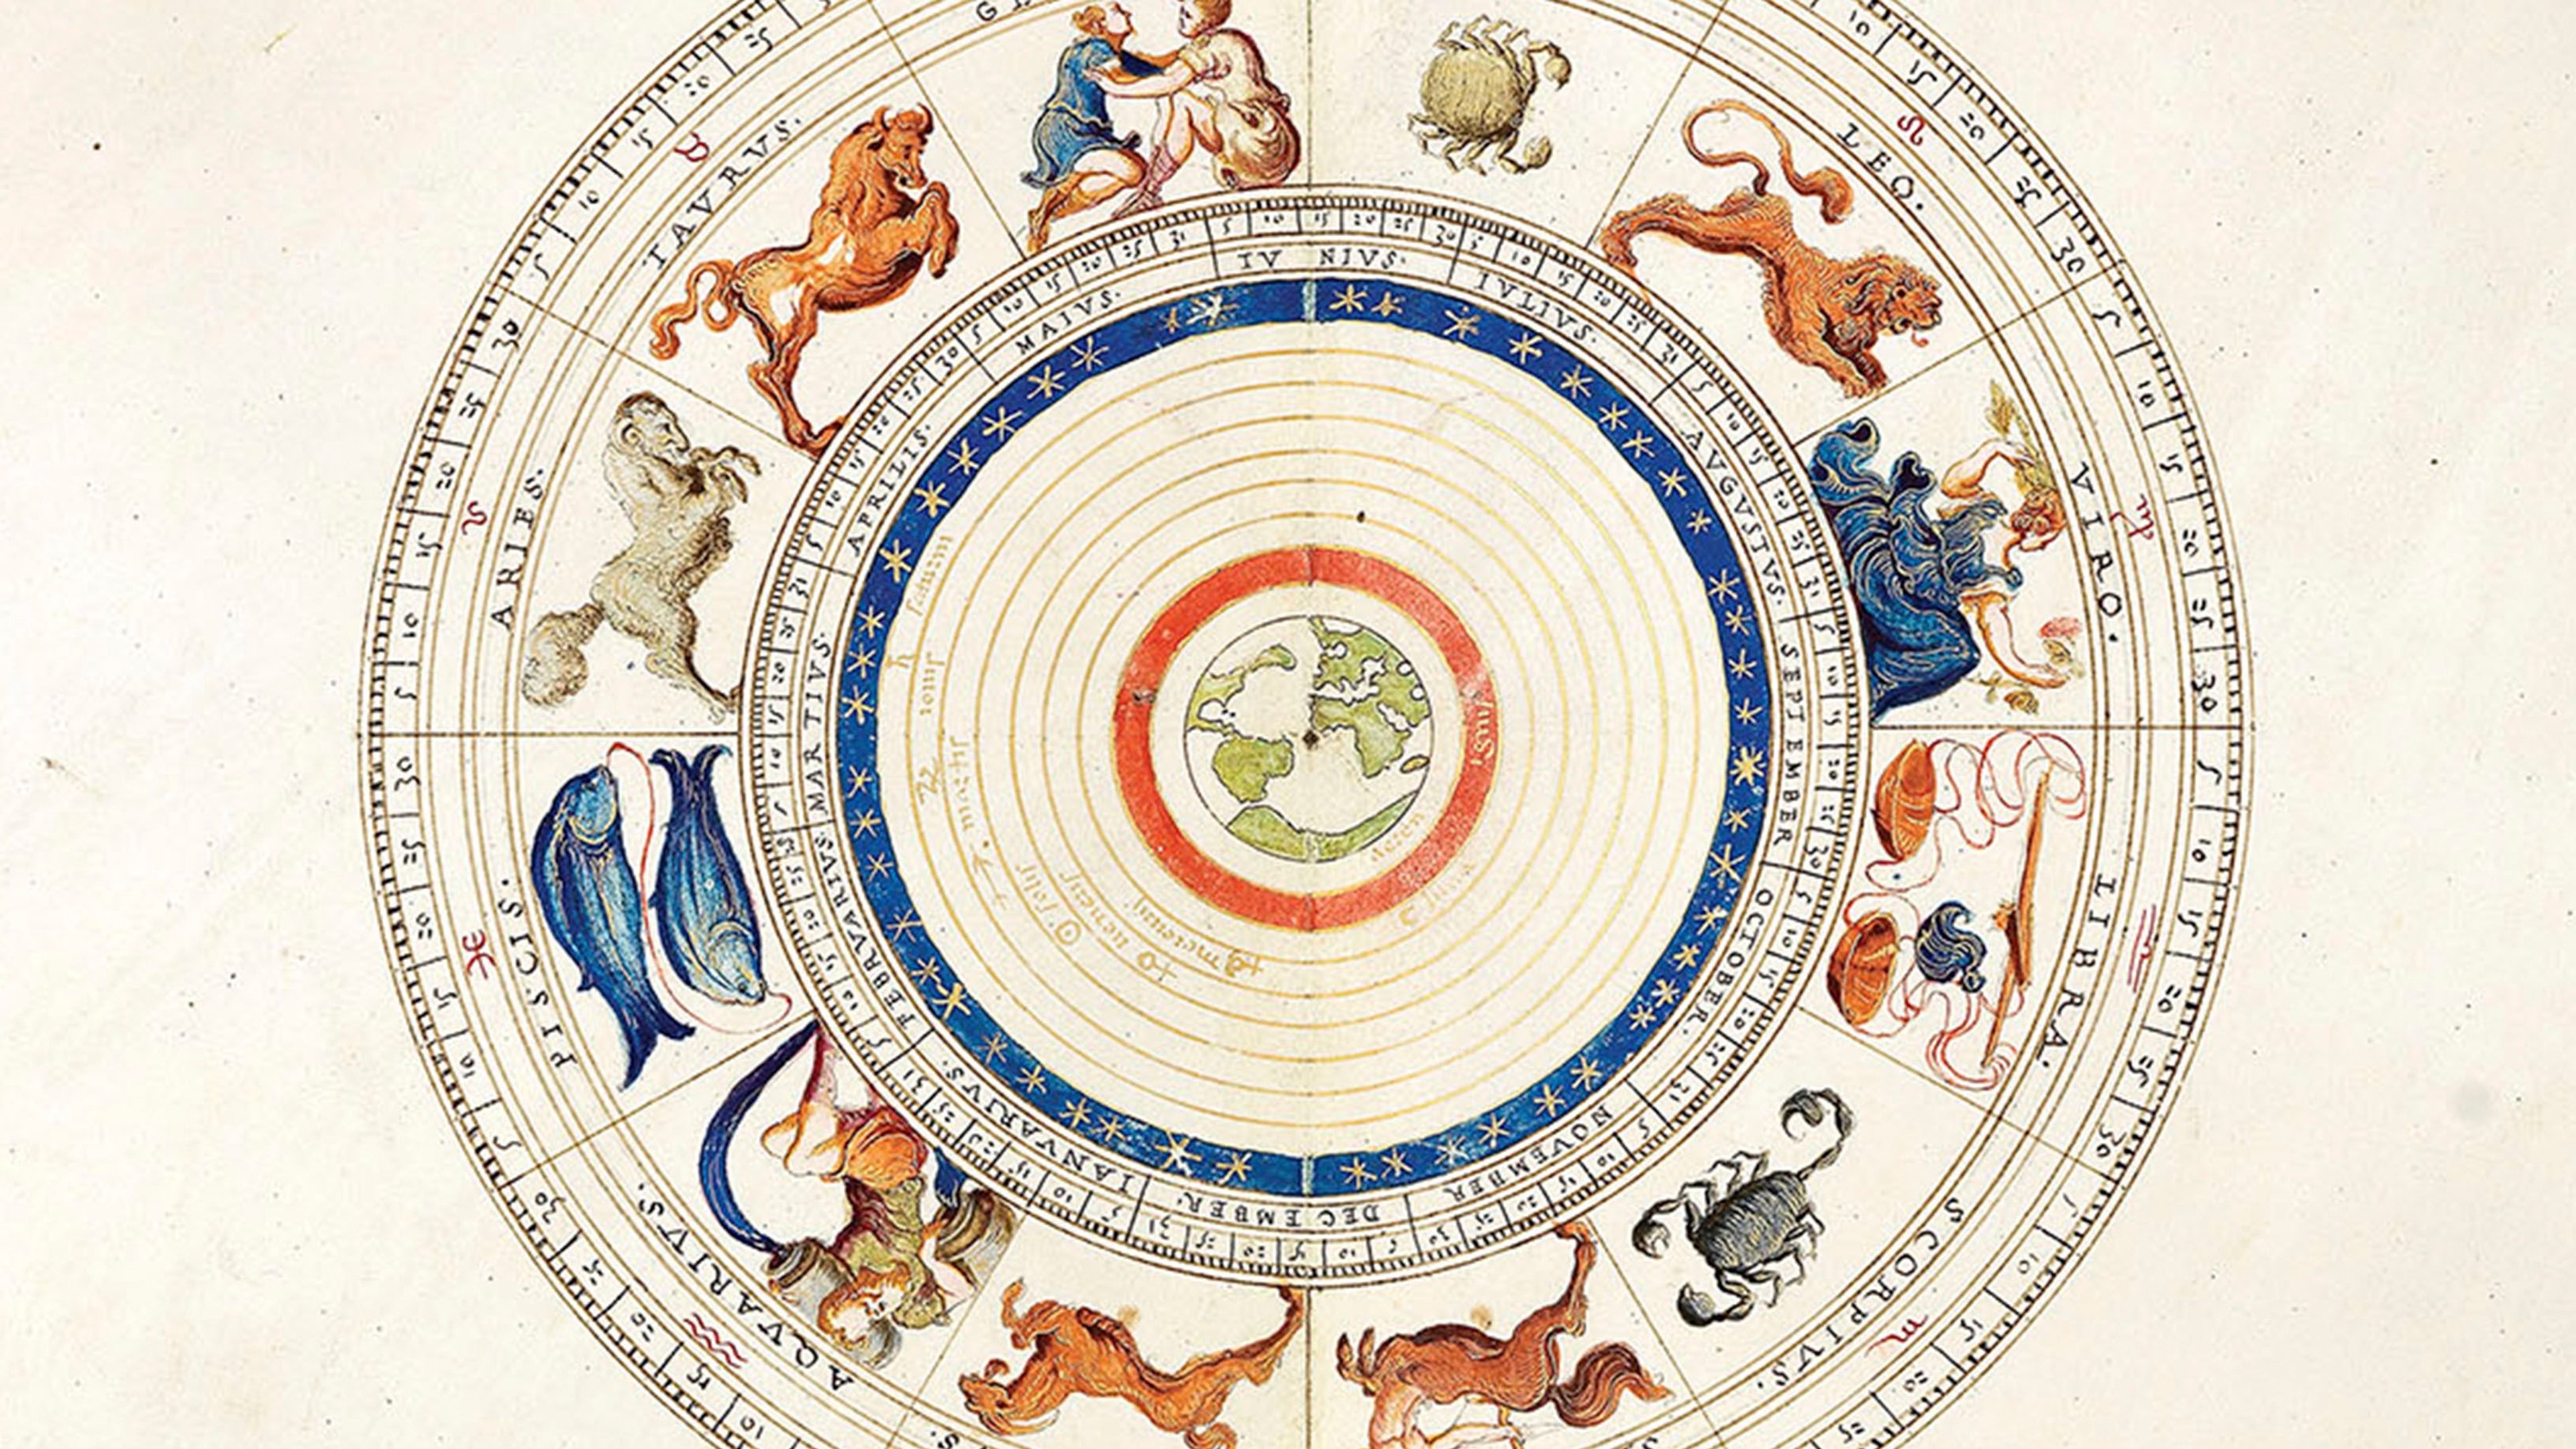 A coloured diagram of the world surrounded by the stars and the zodiac, in rich detail, painted on vellum.